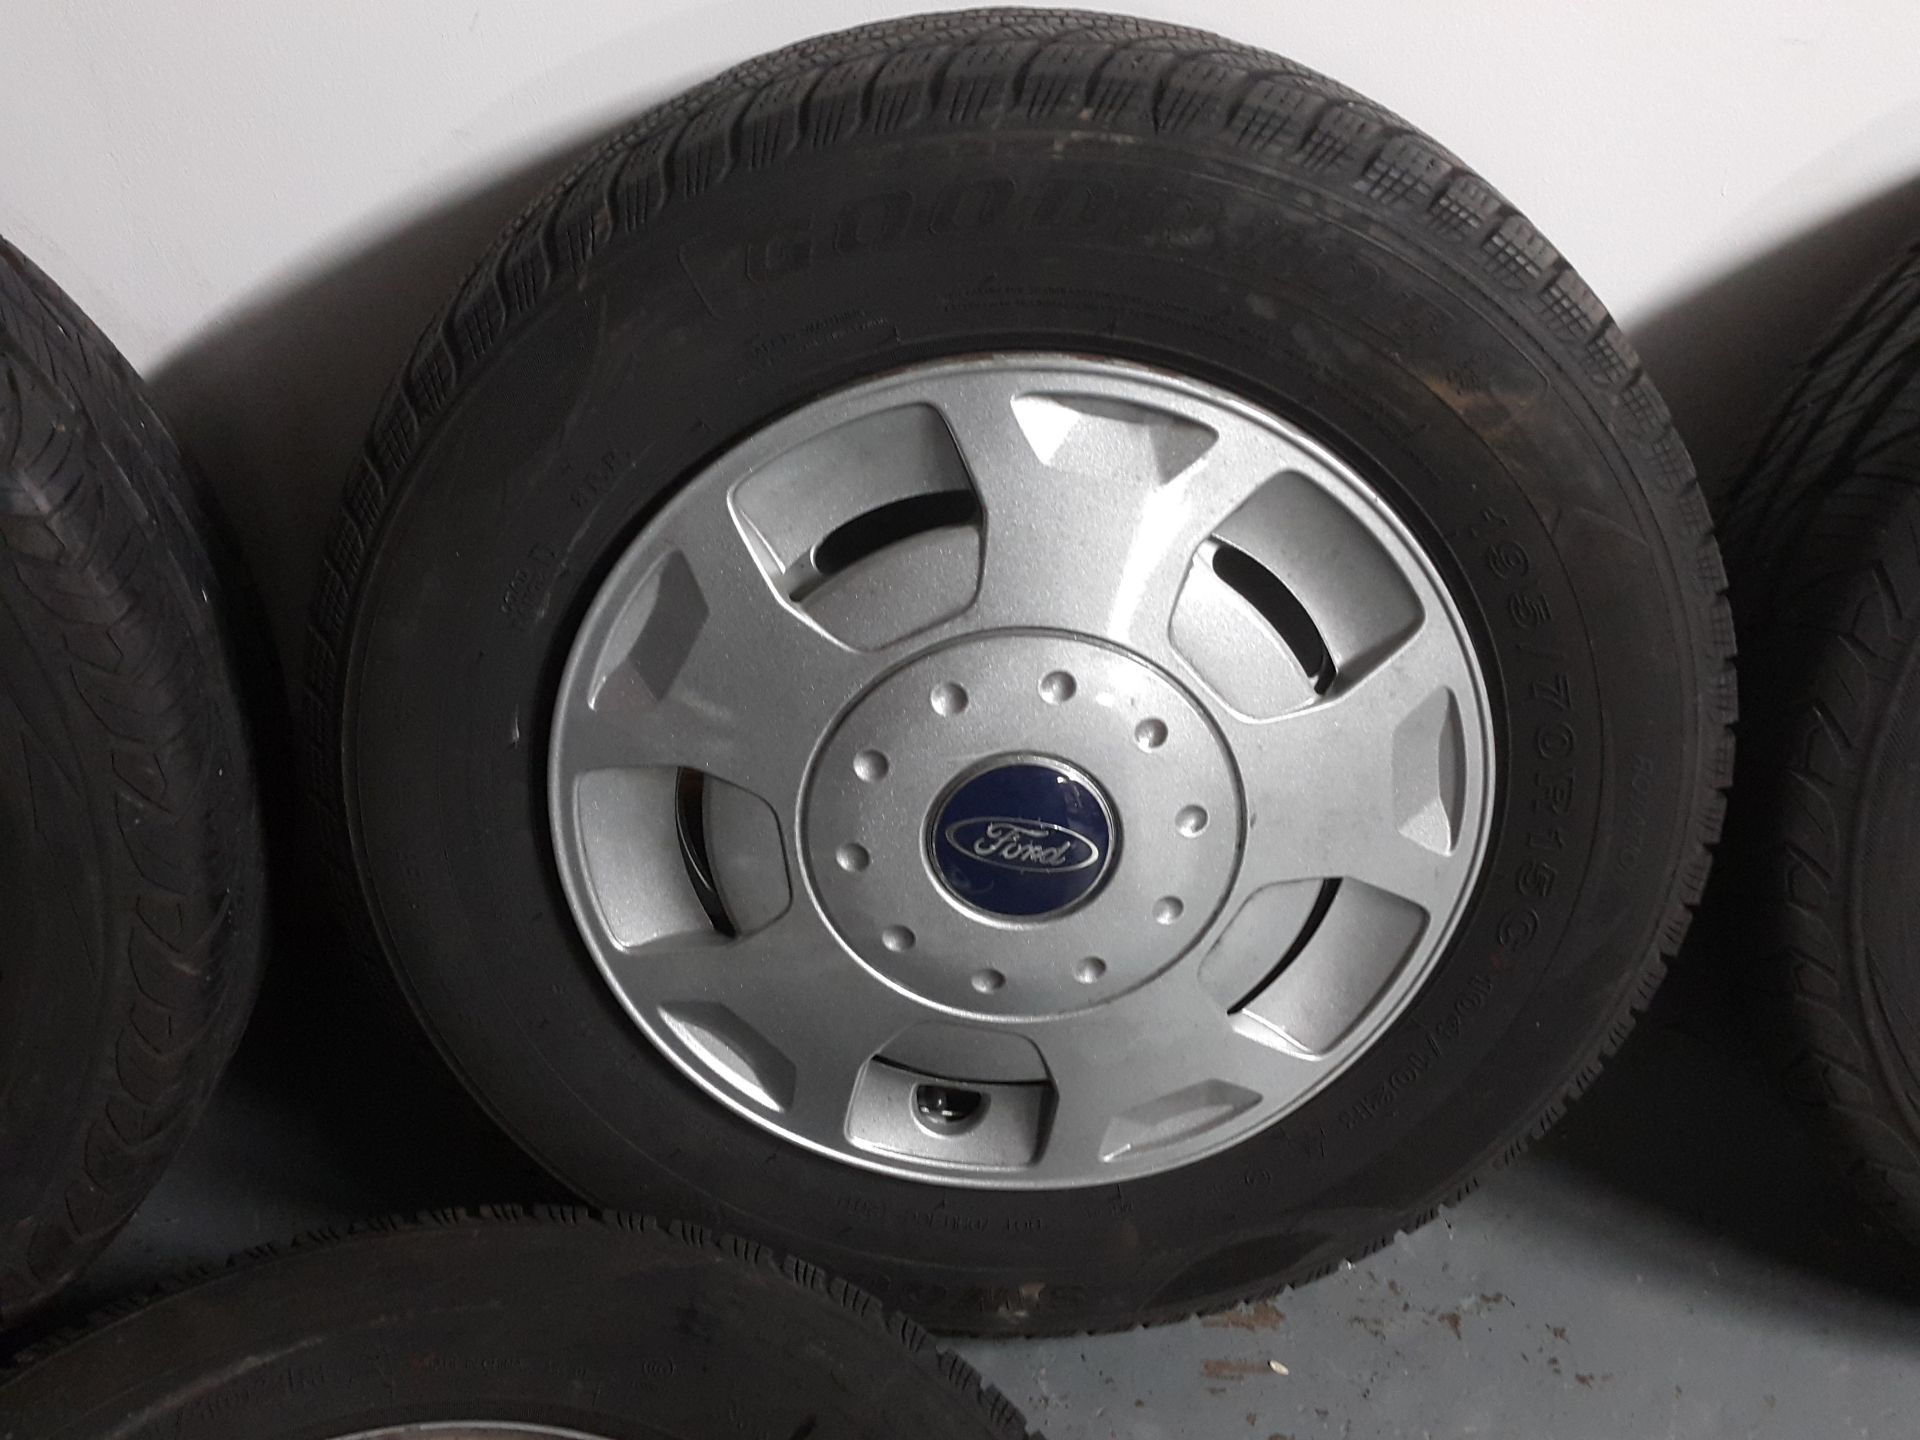 4 X FORD TRANSIT 15" STEEL RIMS WITH TYRES 195/70/R15 (2 UNIROYAL 2 OTHERS) - Image 4 of 9